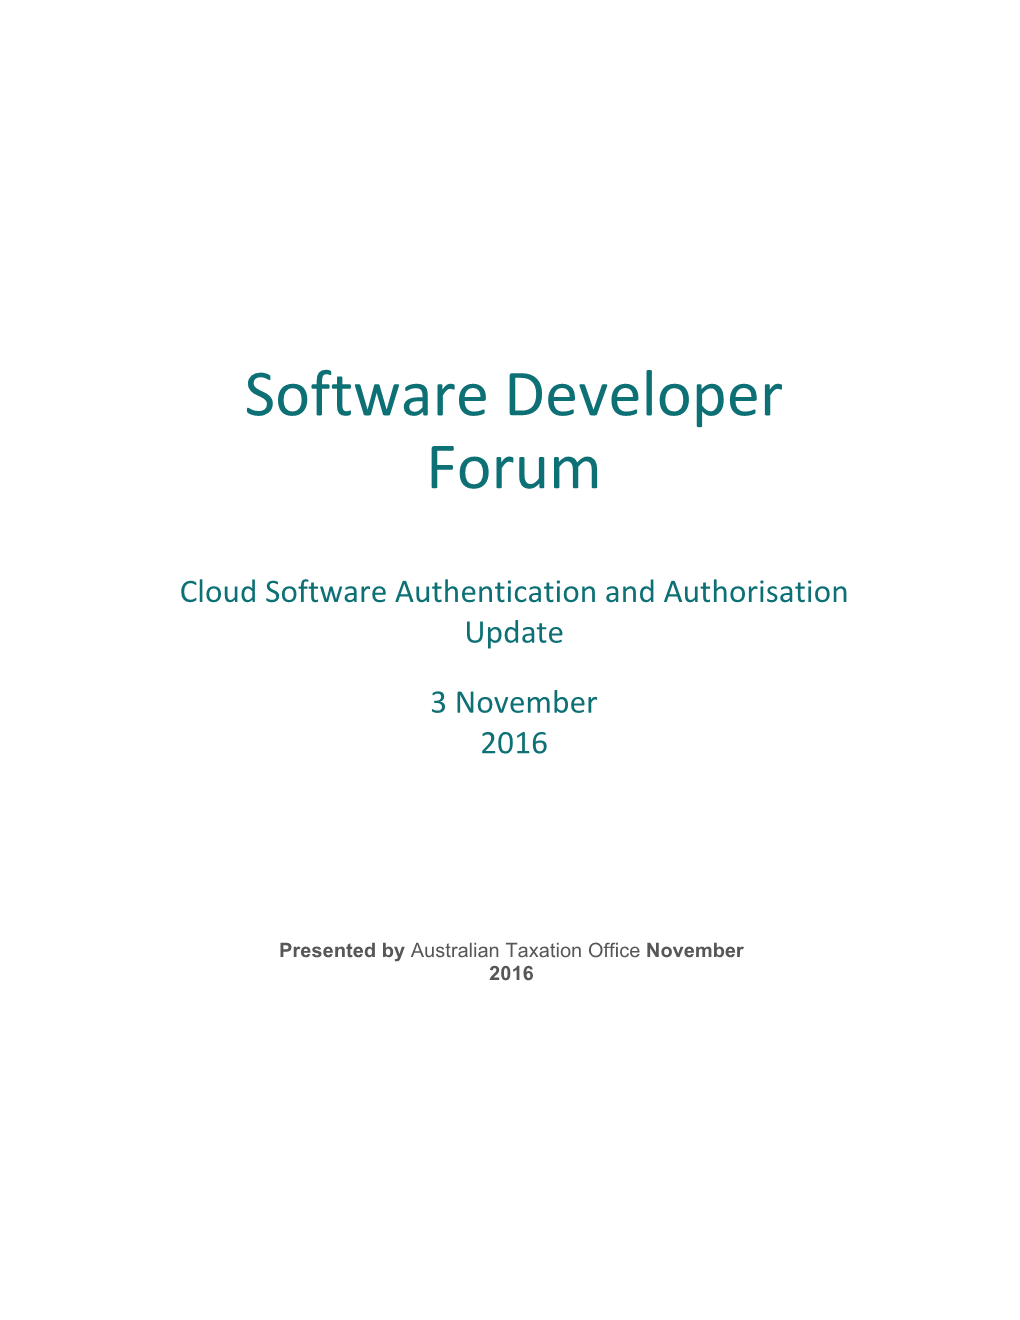 Cloudsoftware Authentication Andauthorisation Update